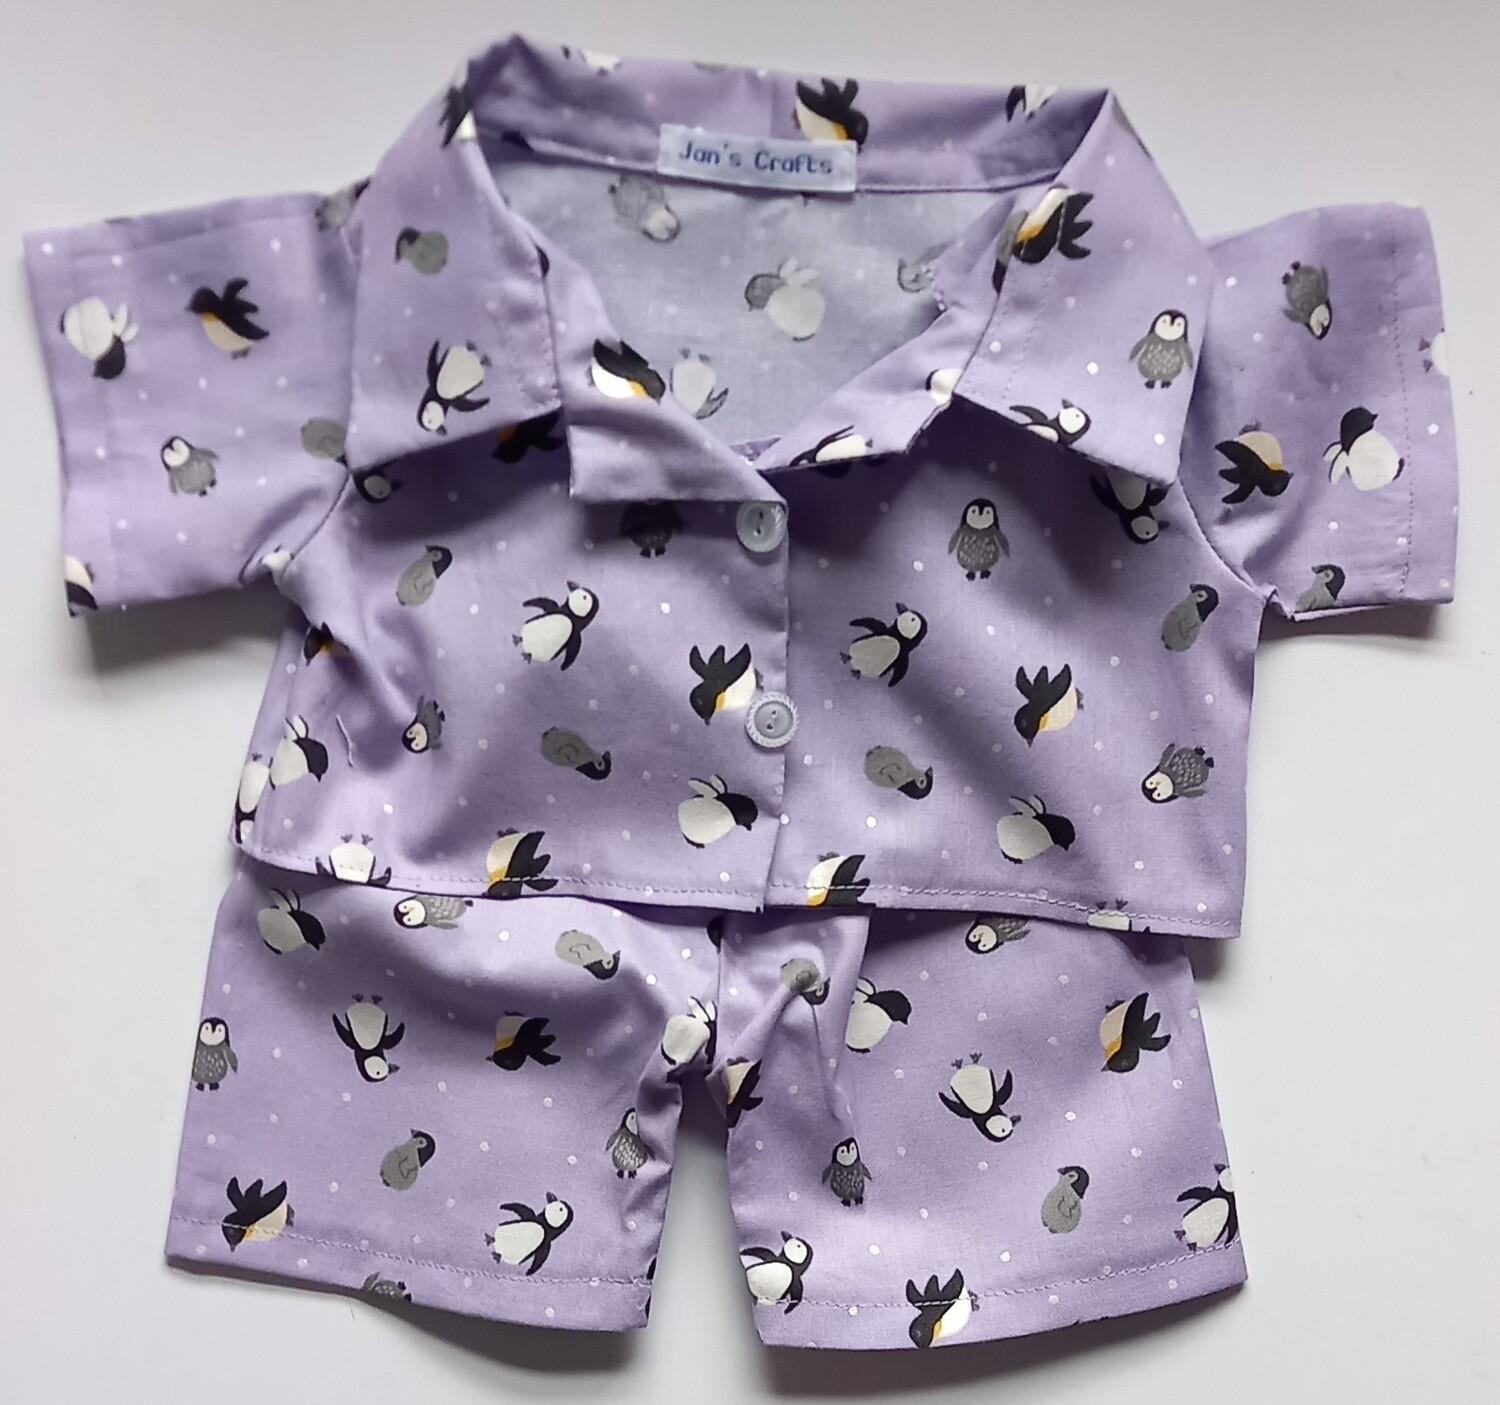 Pyjamas with collar - penguins on a lilac background print.